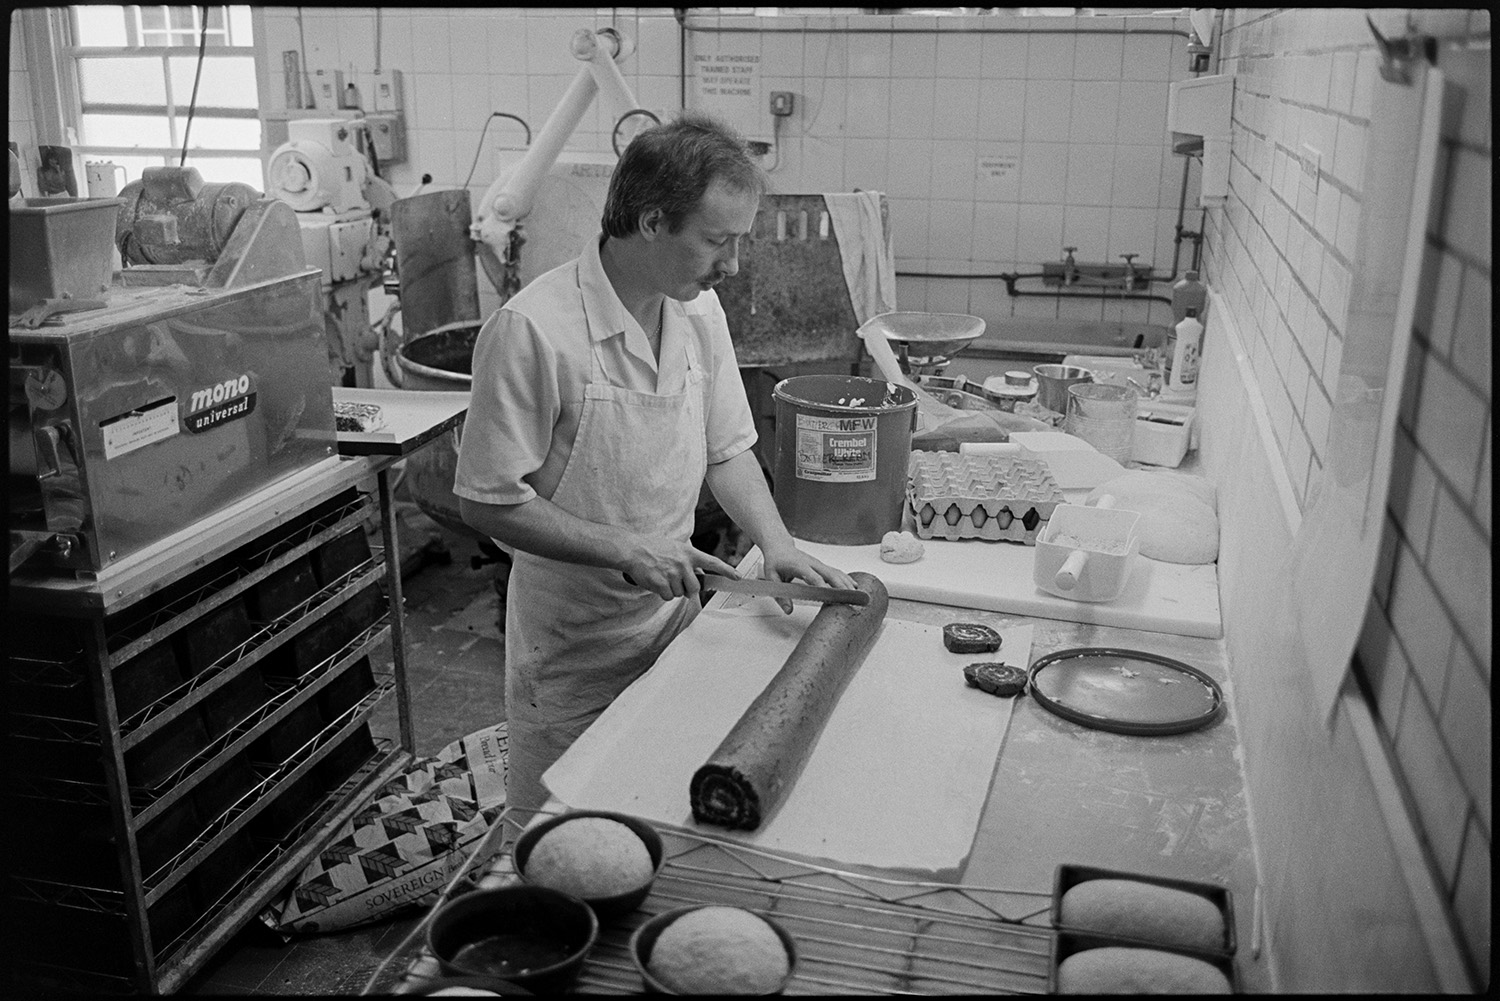 Bakery interior, making bread and serving customers in shop.
[A man working in the white tiled kitchen of The Bakery in East Street, Chulmleigh. He is slicing a chocolate swiss roll on a bench. There is a dough mixing machine along with other ingredients and equipment in the background.]